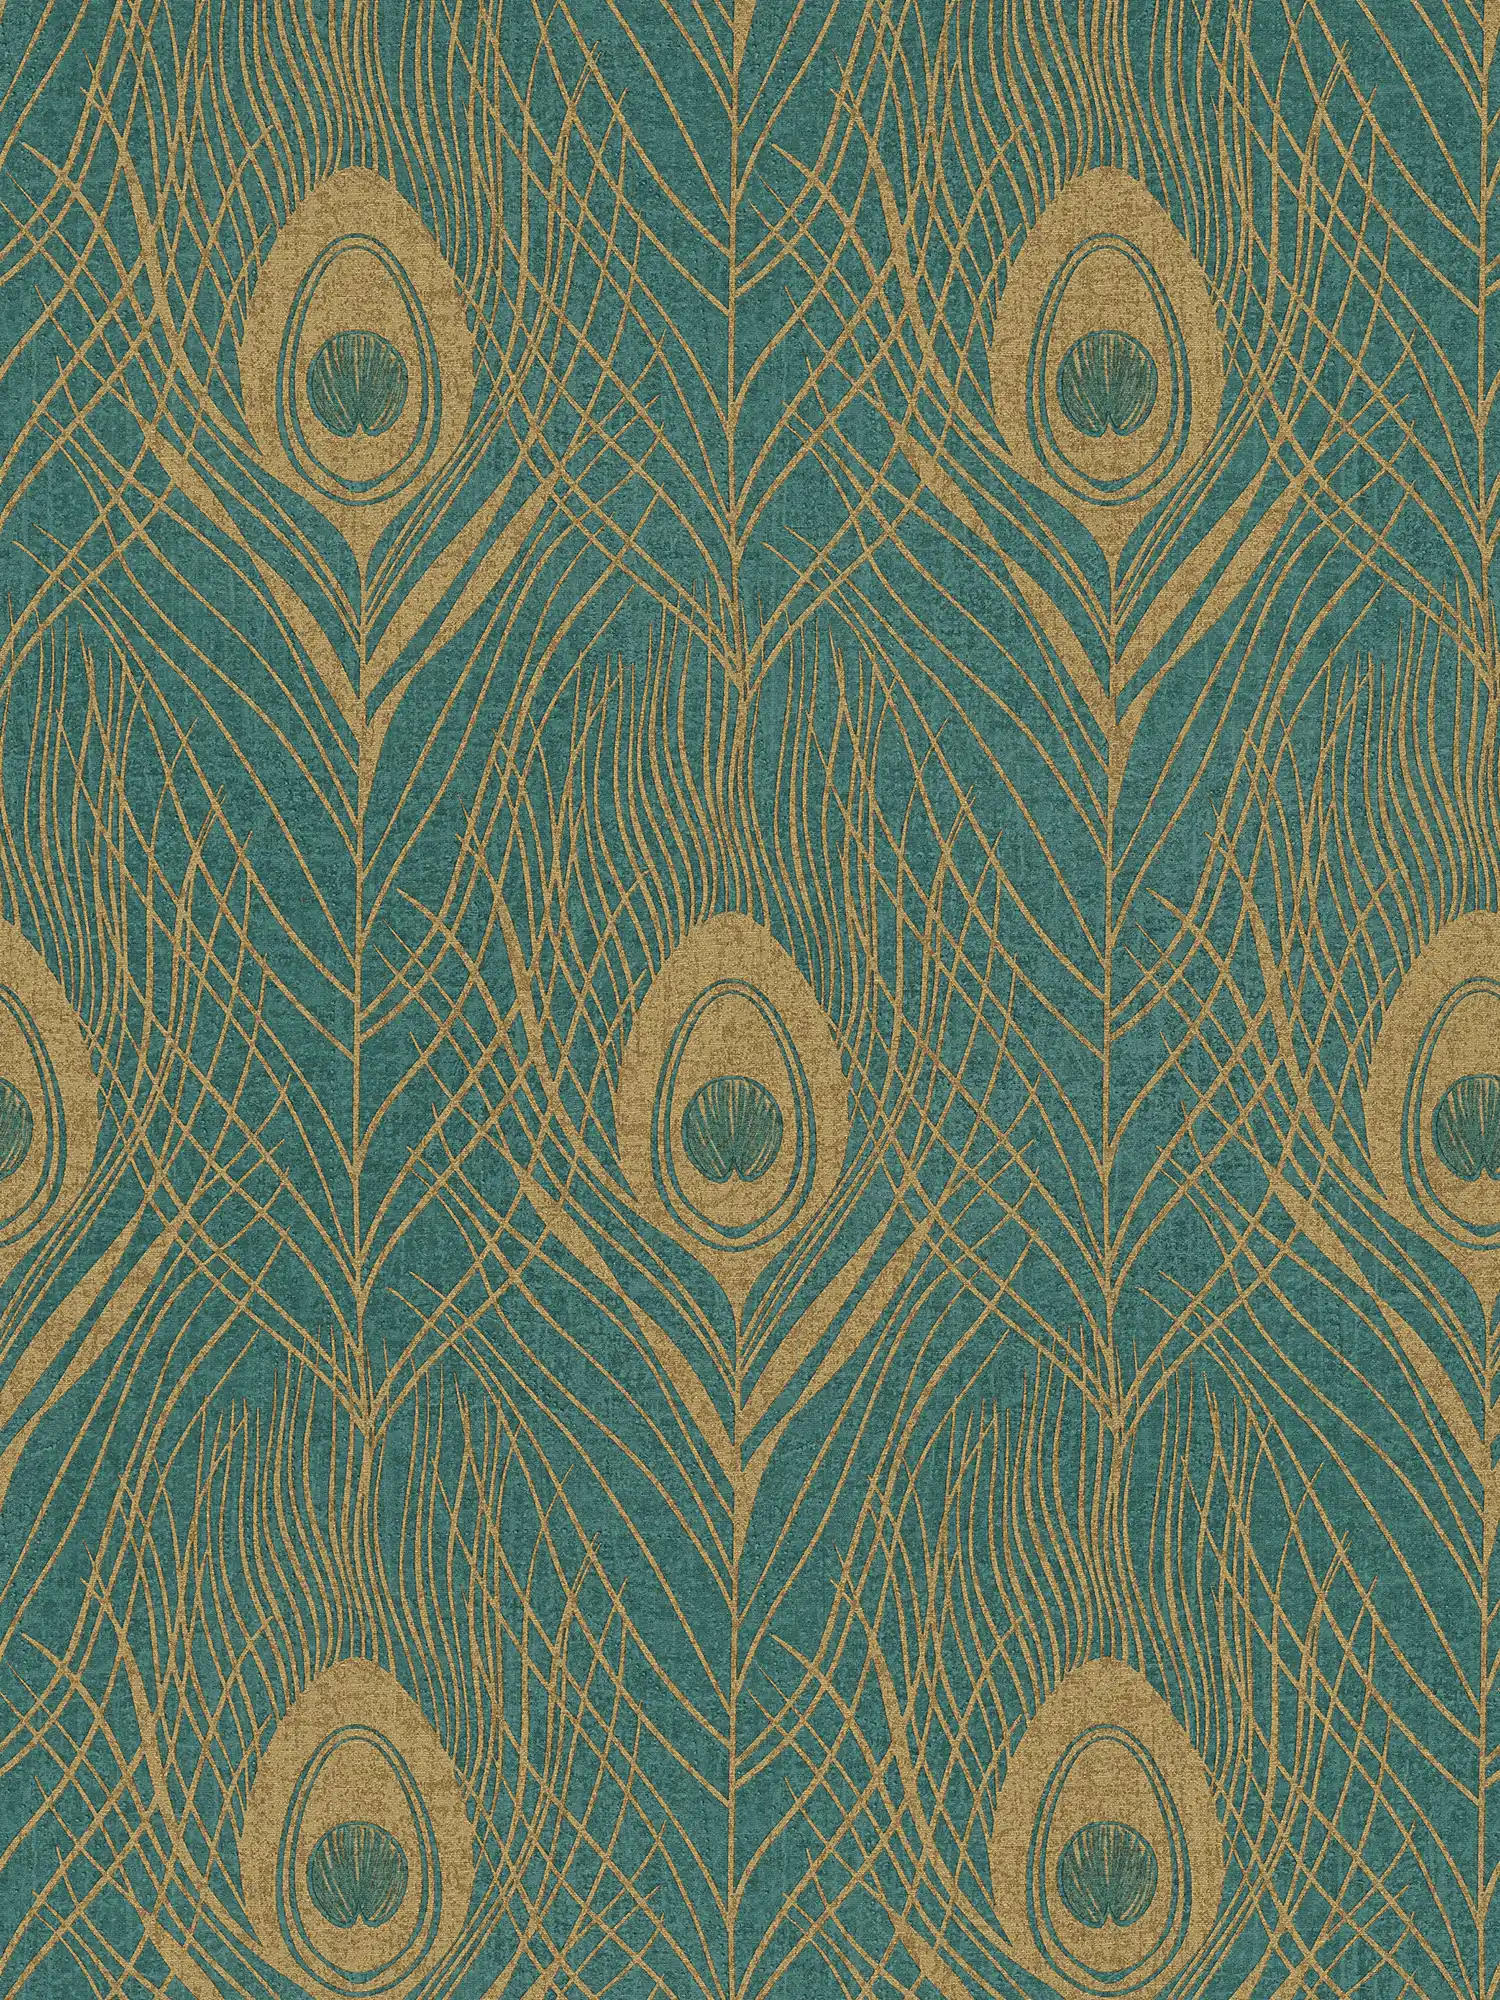 Aquamarine non-woven wallpaper with peacock feathers in metallic look - gold, green, yellow
